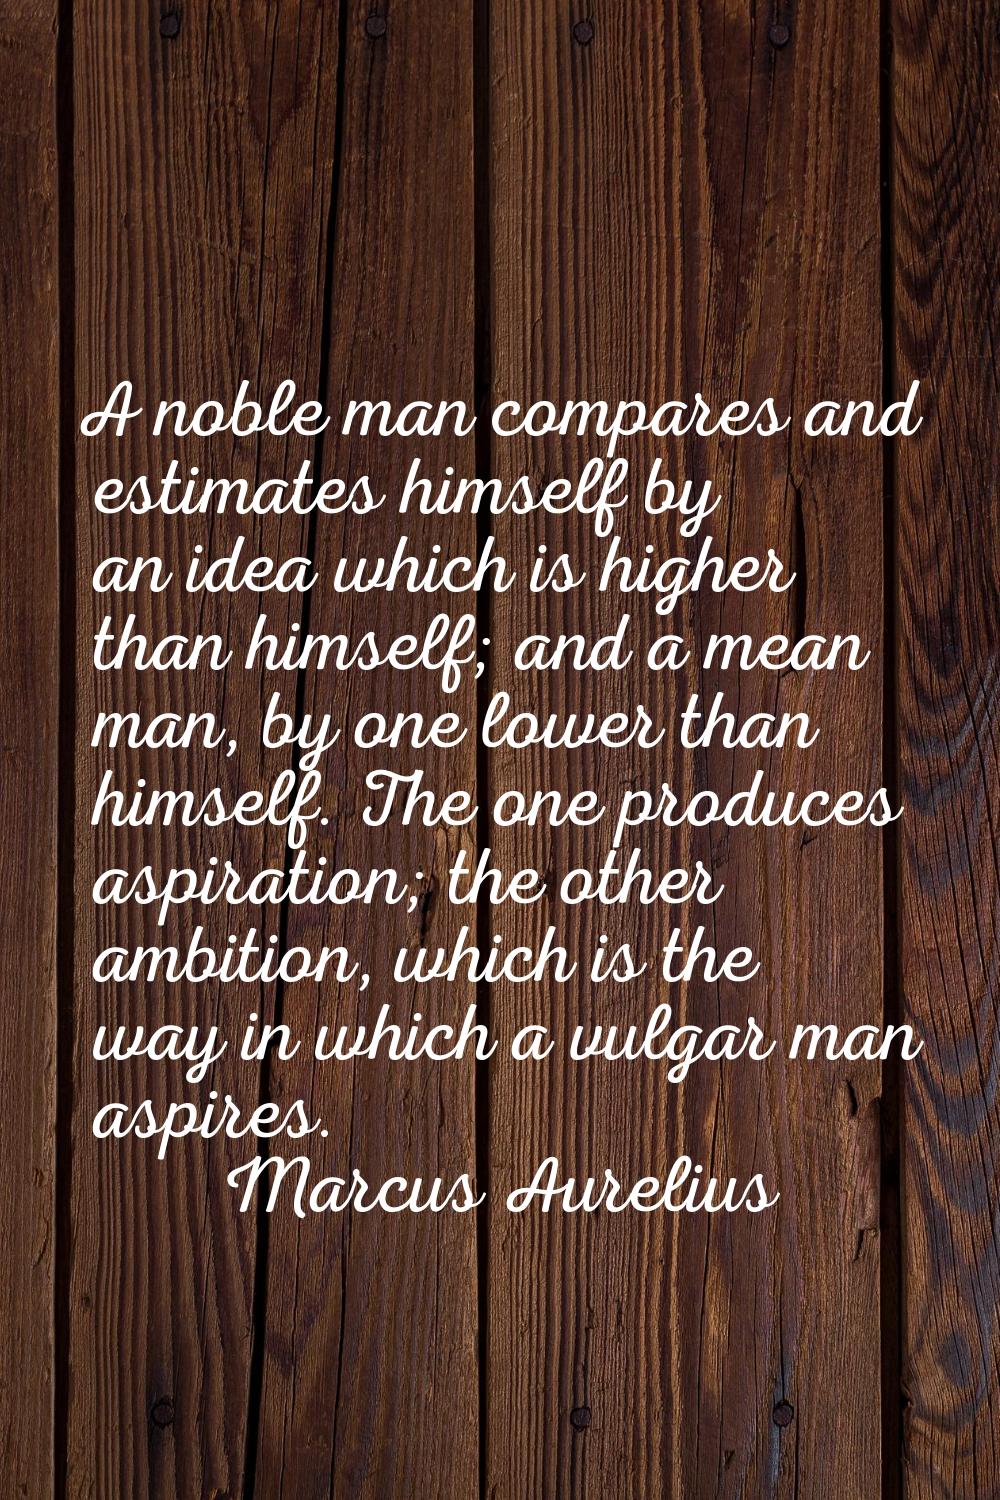 A noble man compares and estimates himself by an idea which is higher than himself; and a mean man,